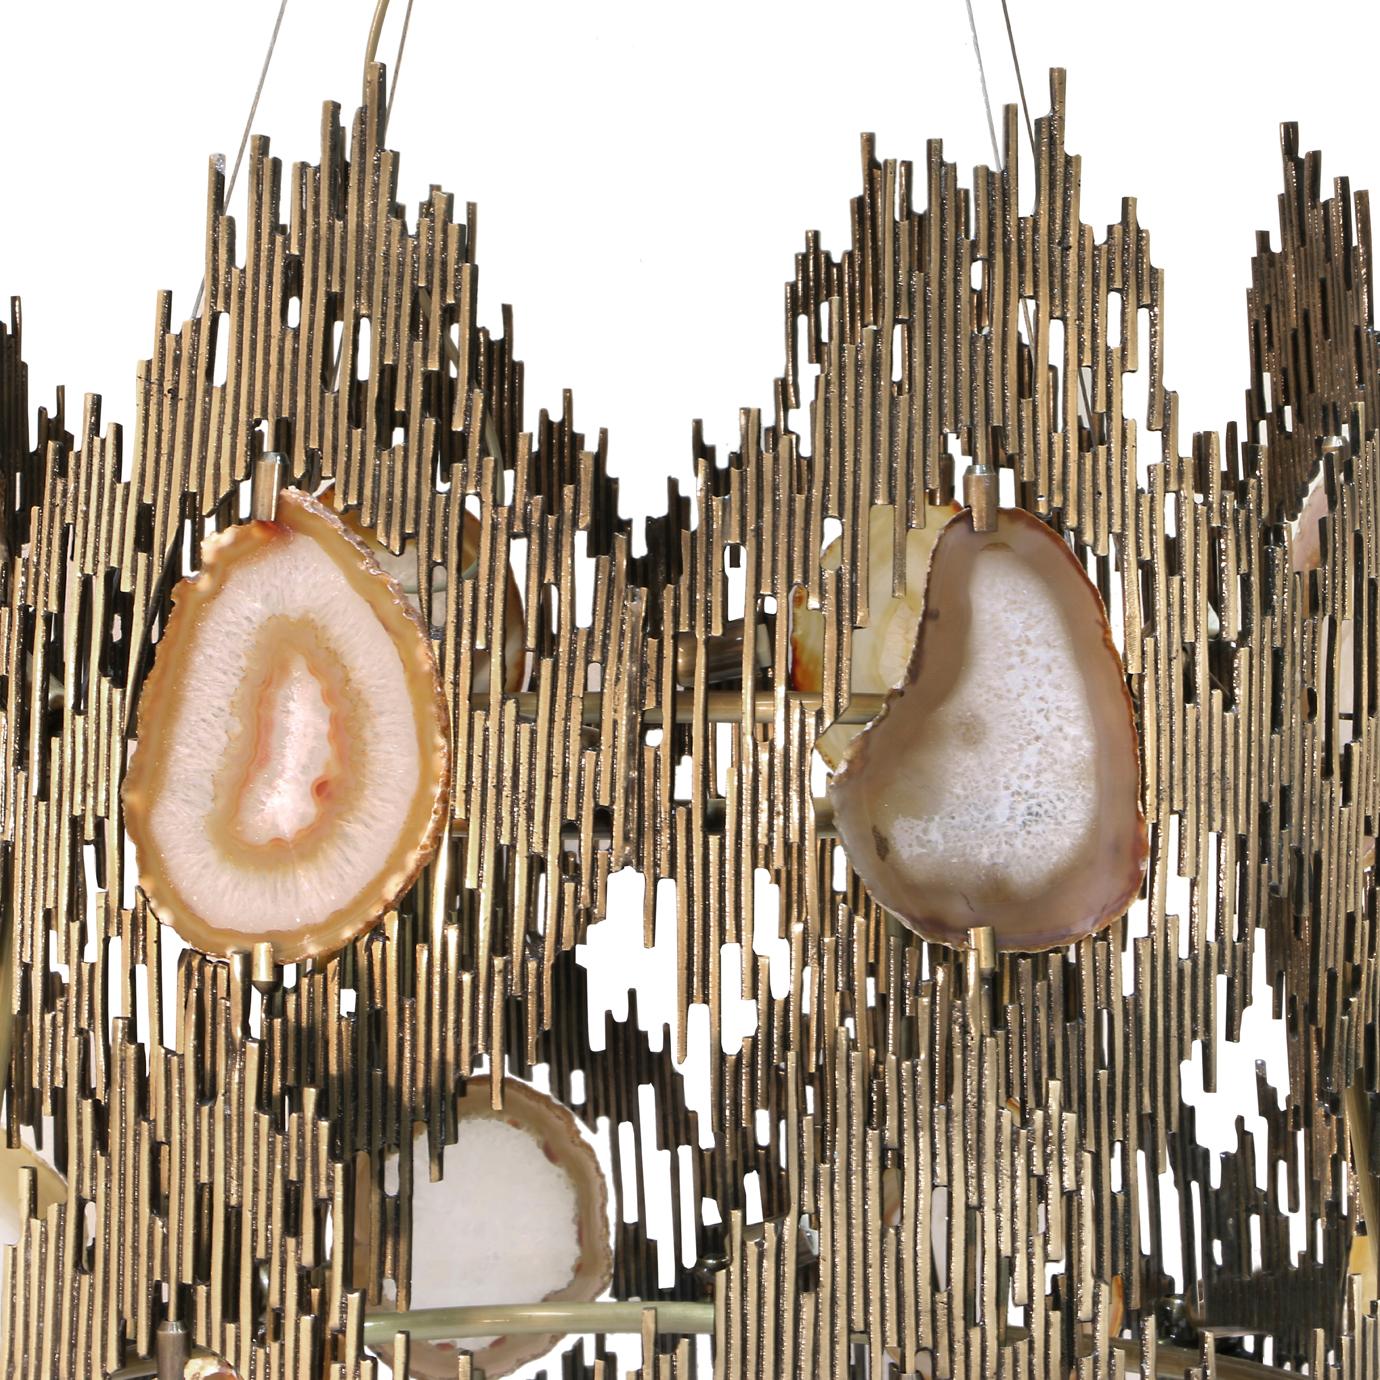 The Vivre offers exquisite vintage details with a decidedly modern profile. The dark neutral tones and the exquisite patterns in the agate stones are uniquely captivating against the light and the gold metal which embraces each stone in perfect